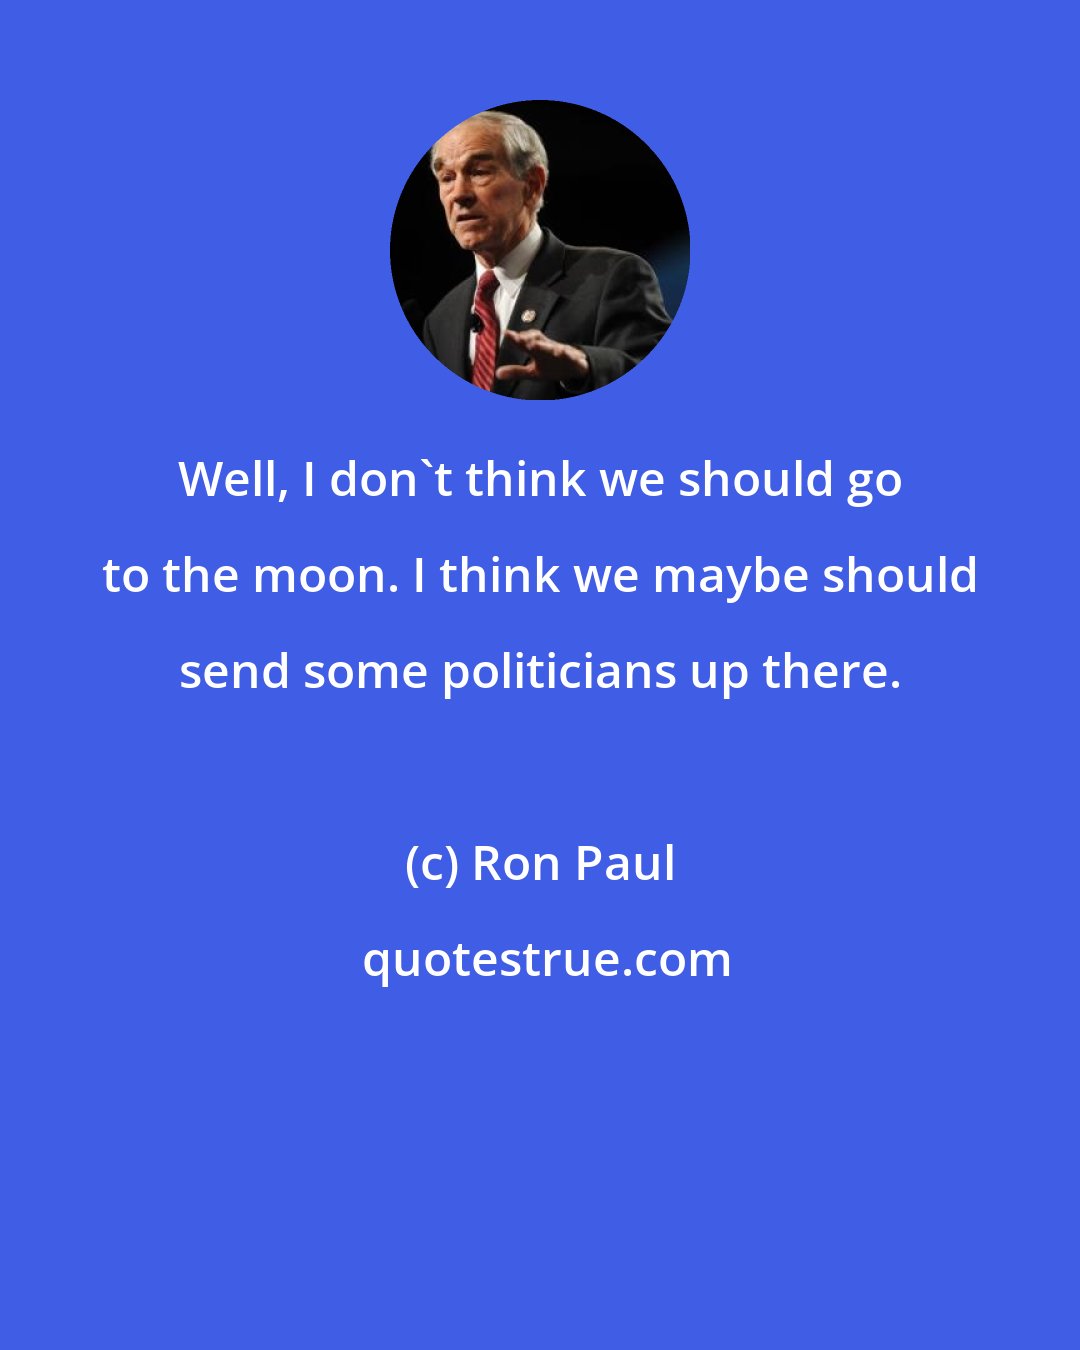 Ron Paul: Well, I don't think we should go to the moon. I think we maybe should send some politicians up there.